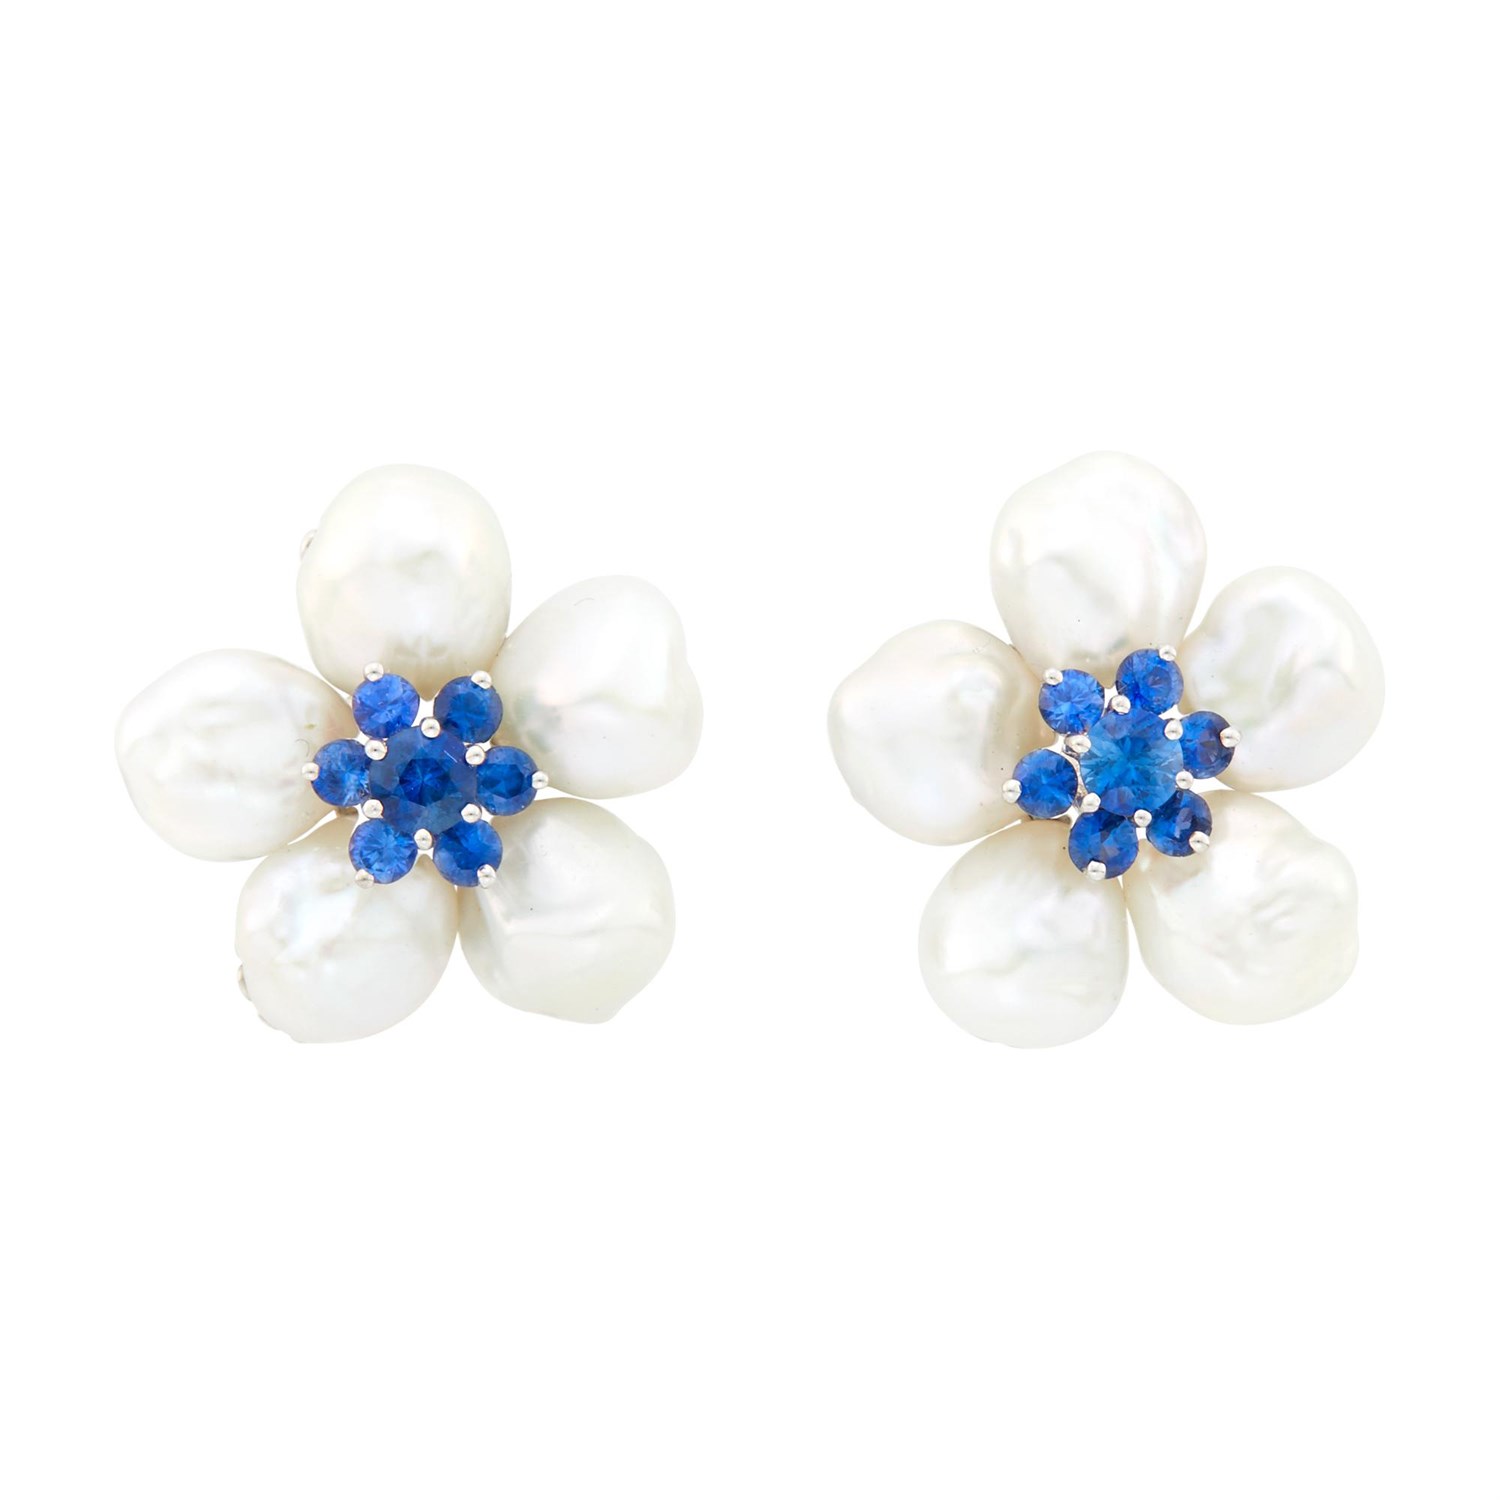 Lot 1146 - Seaman Schepps Pair of White Gold, Baroque Cultured Pearl and Sapphire Flower Earrings